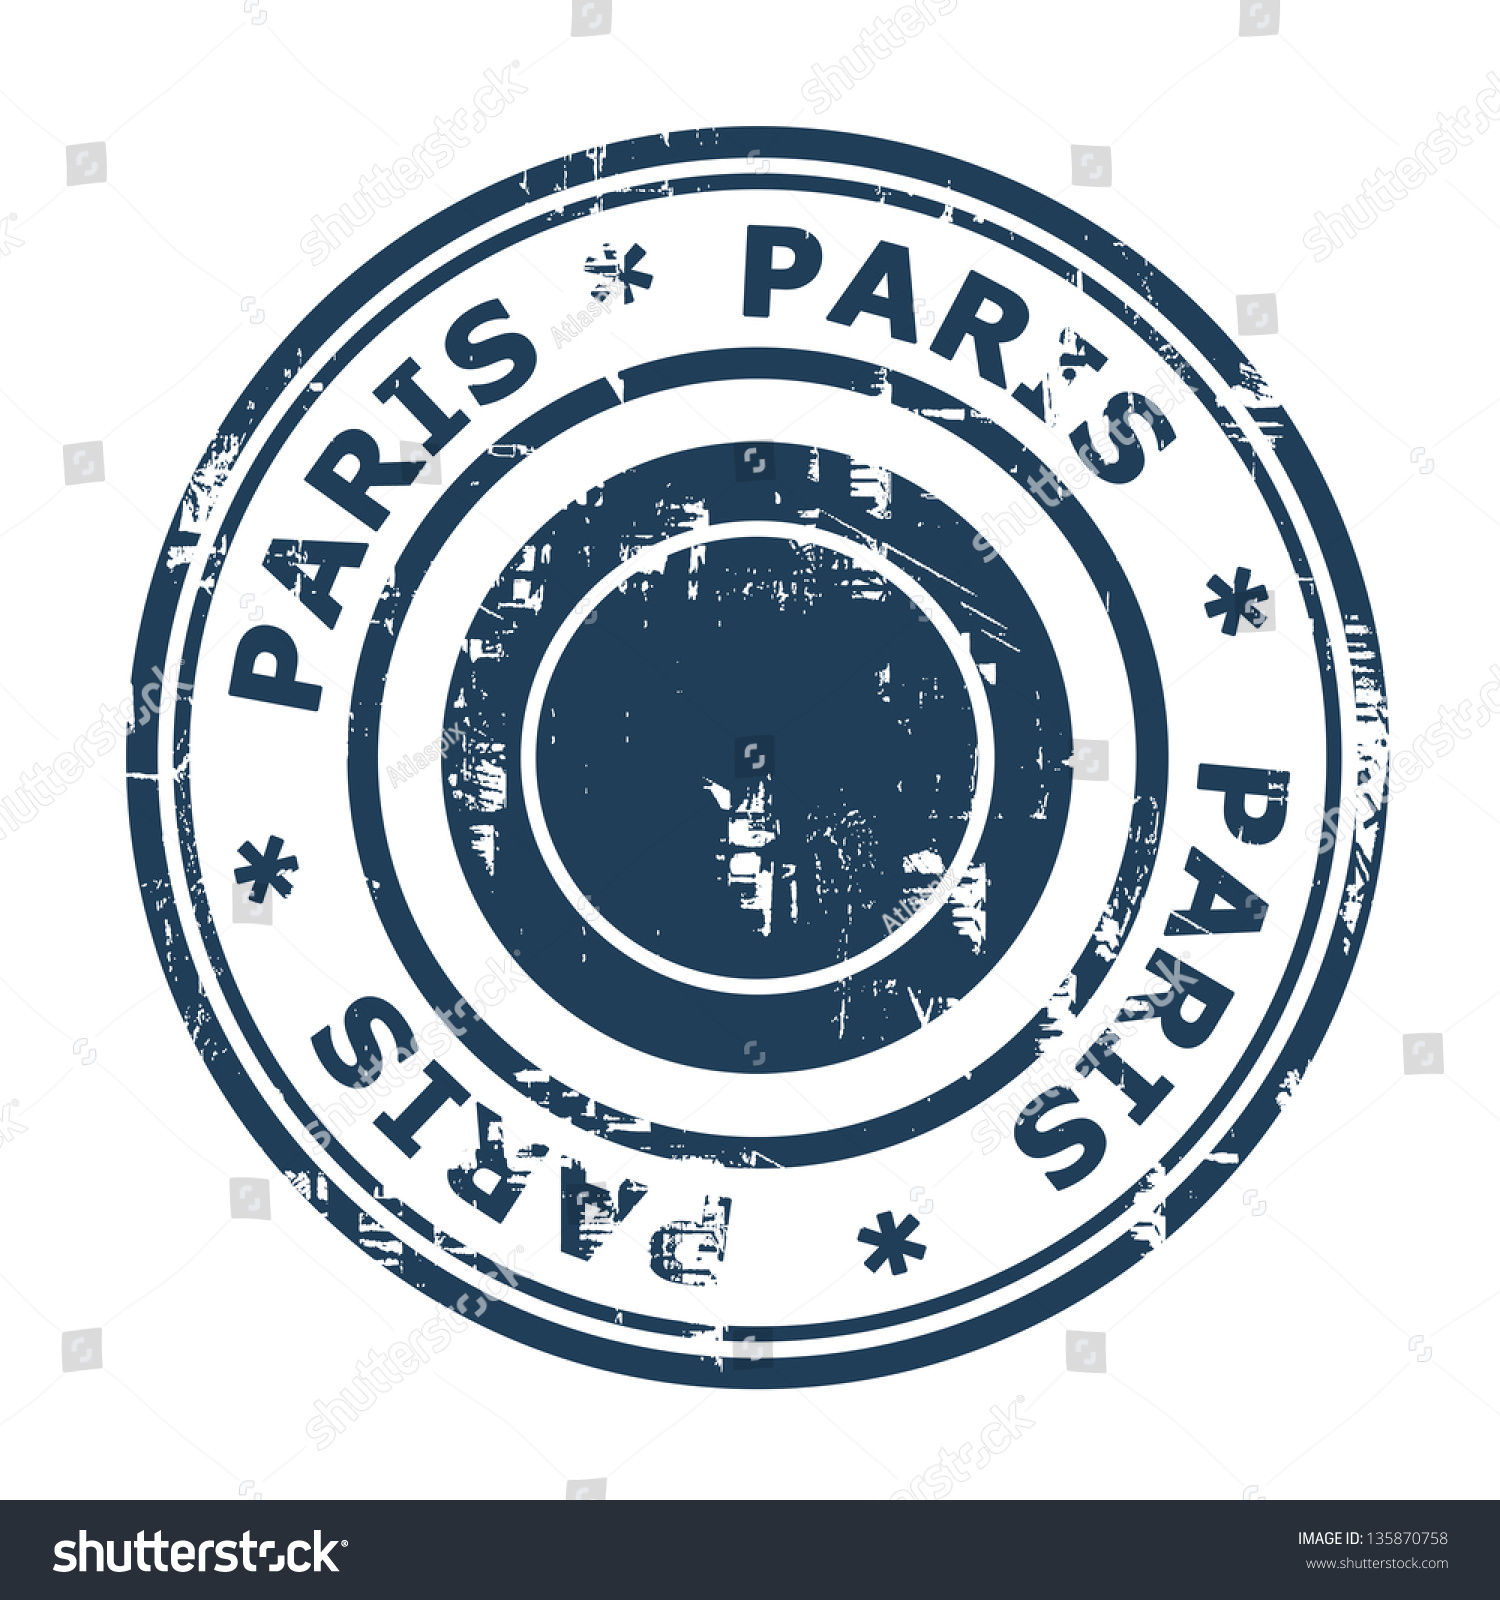 Paris Travel Stamp Isolated On A White Background. Stock Photo ...